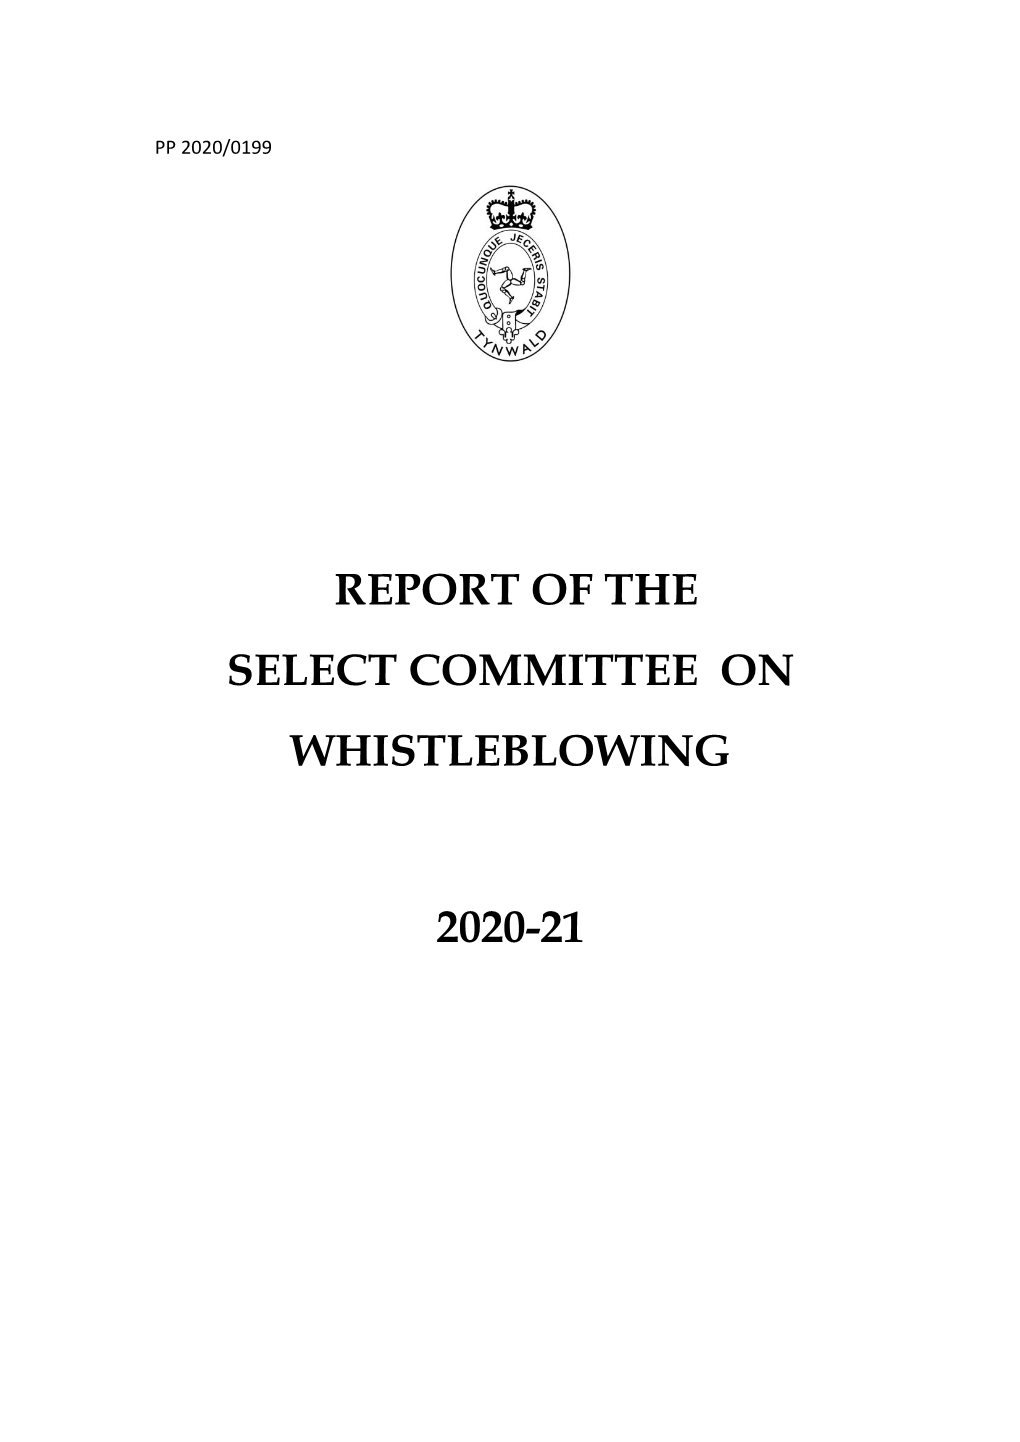 Report of the Select Committee on Whistleblowing 2020-21